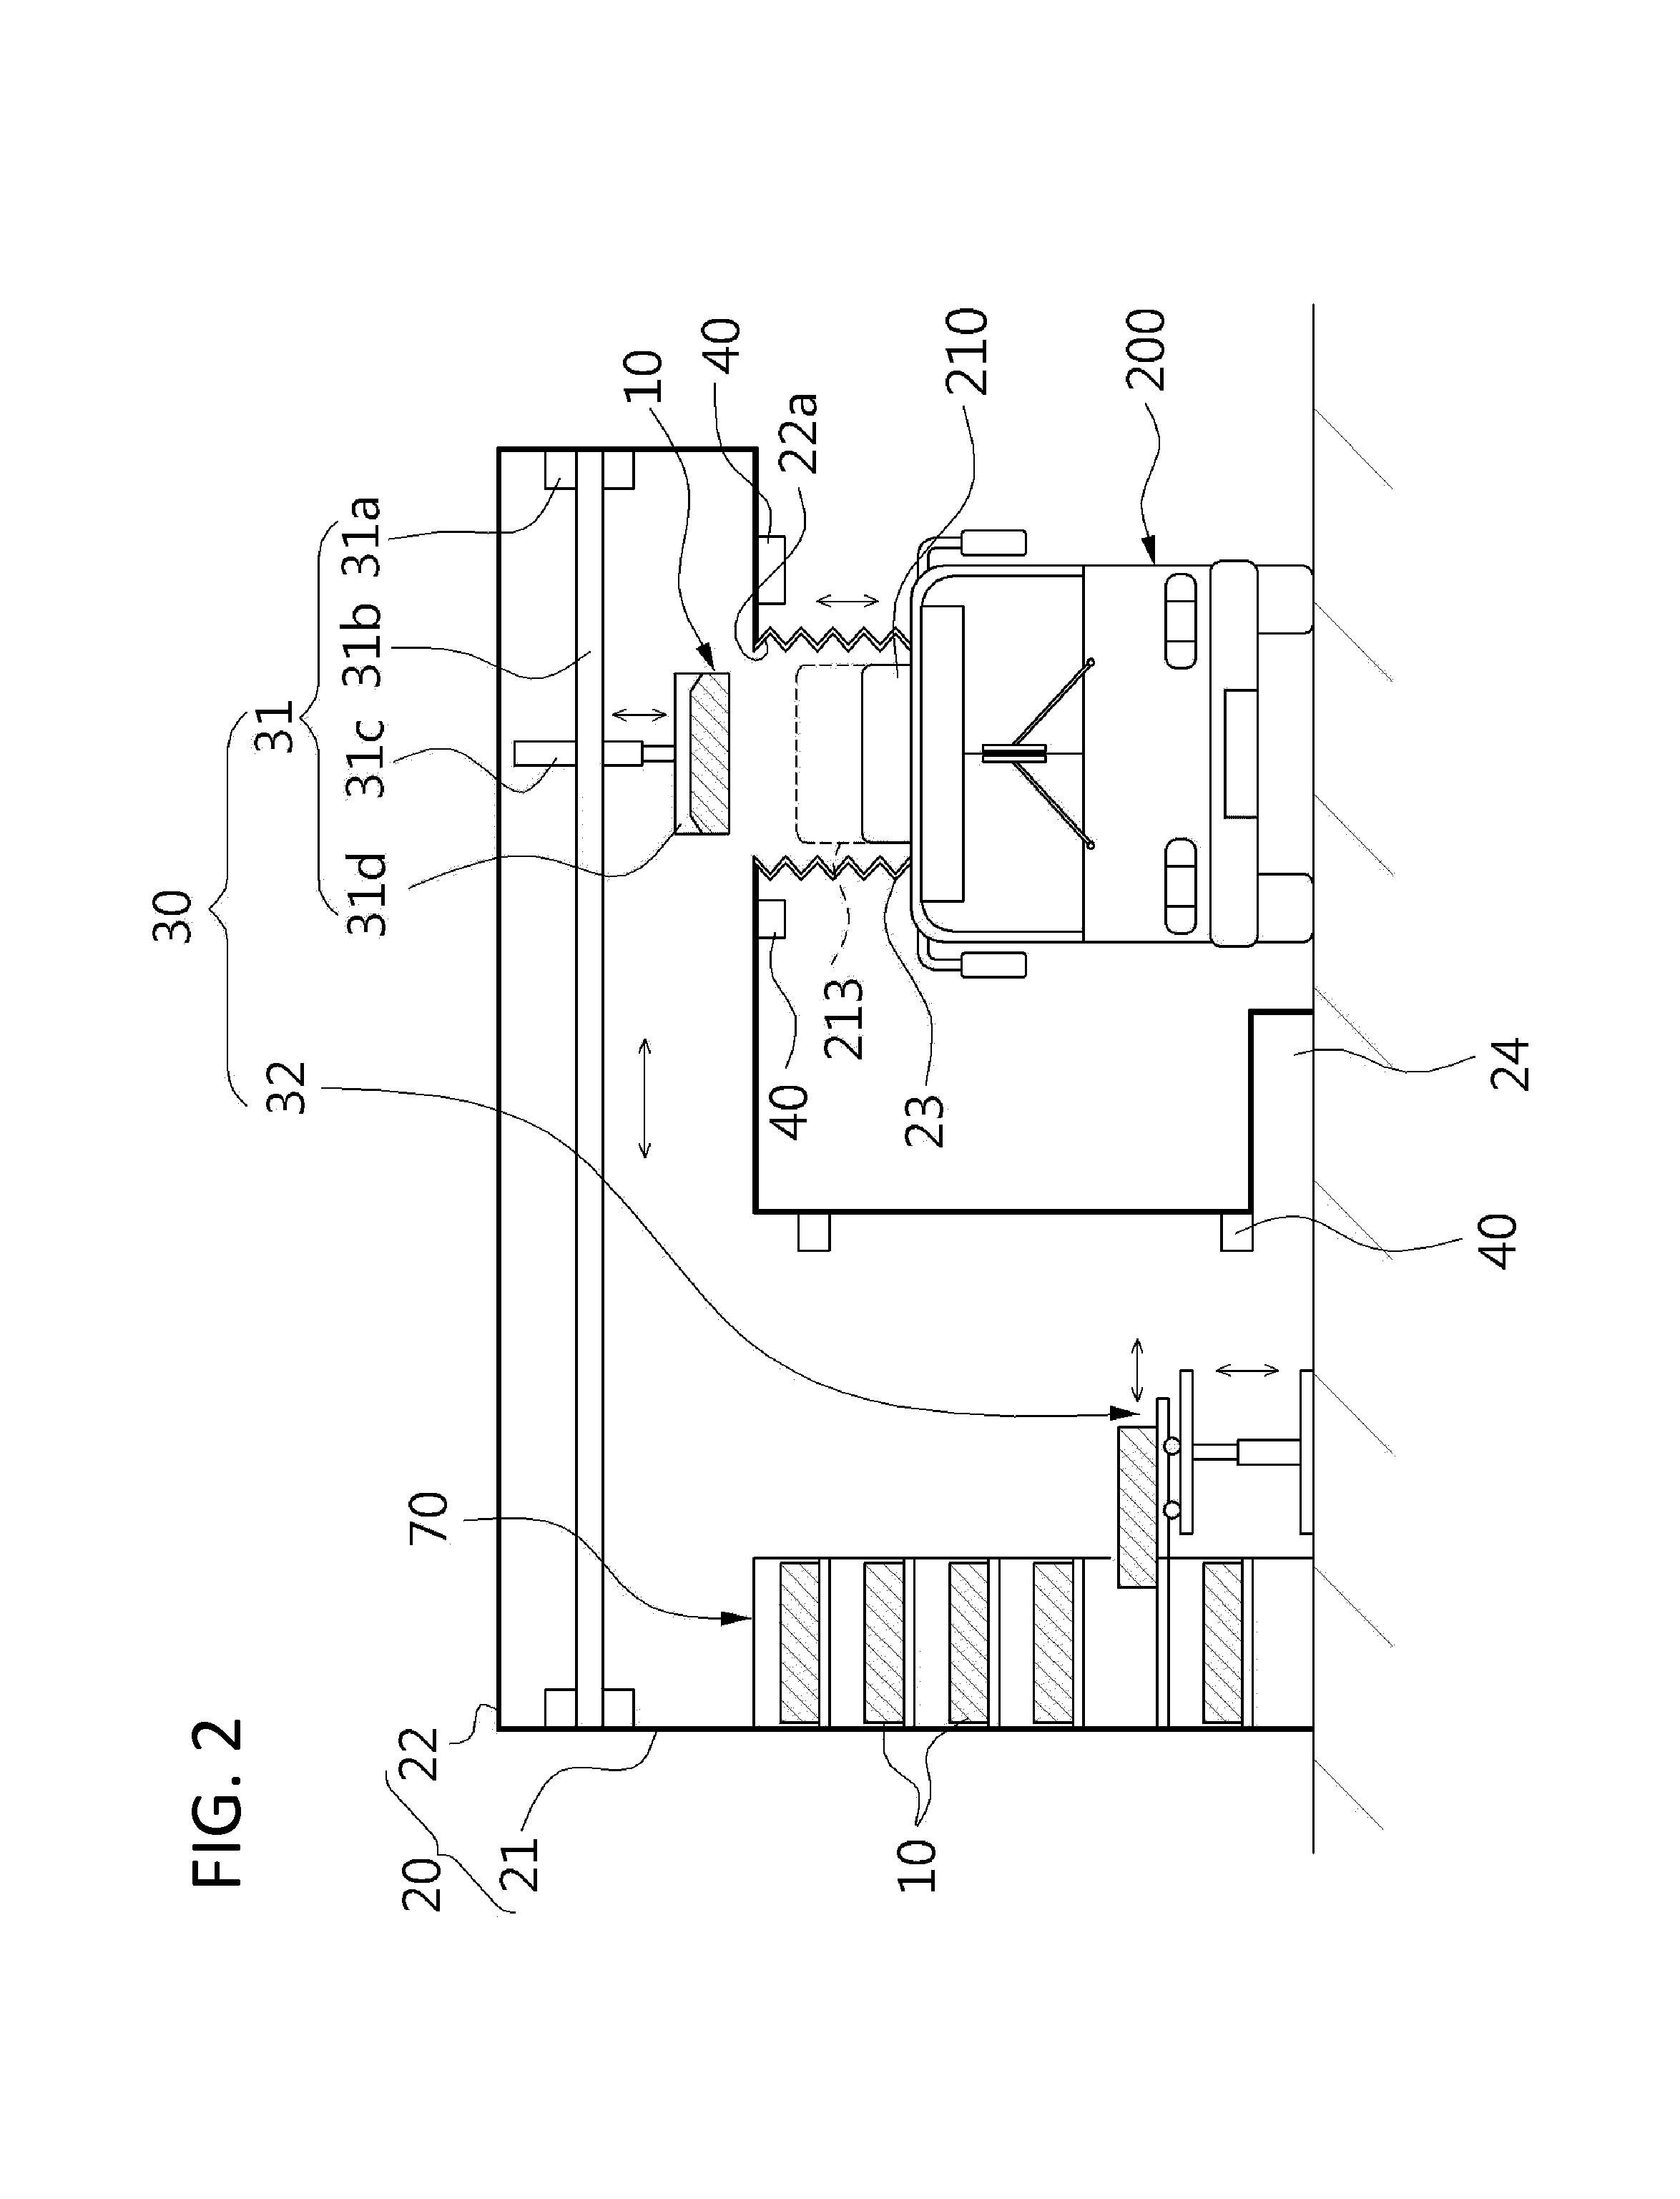 Battery exchanging-type charging station system for electric vehicle